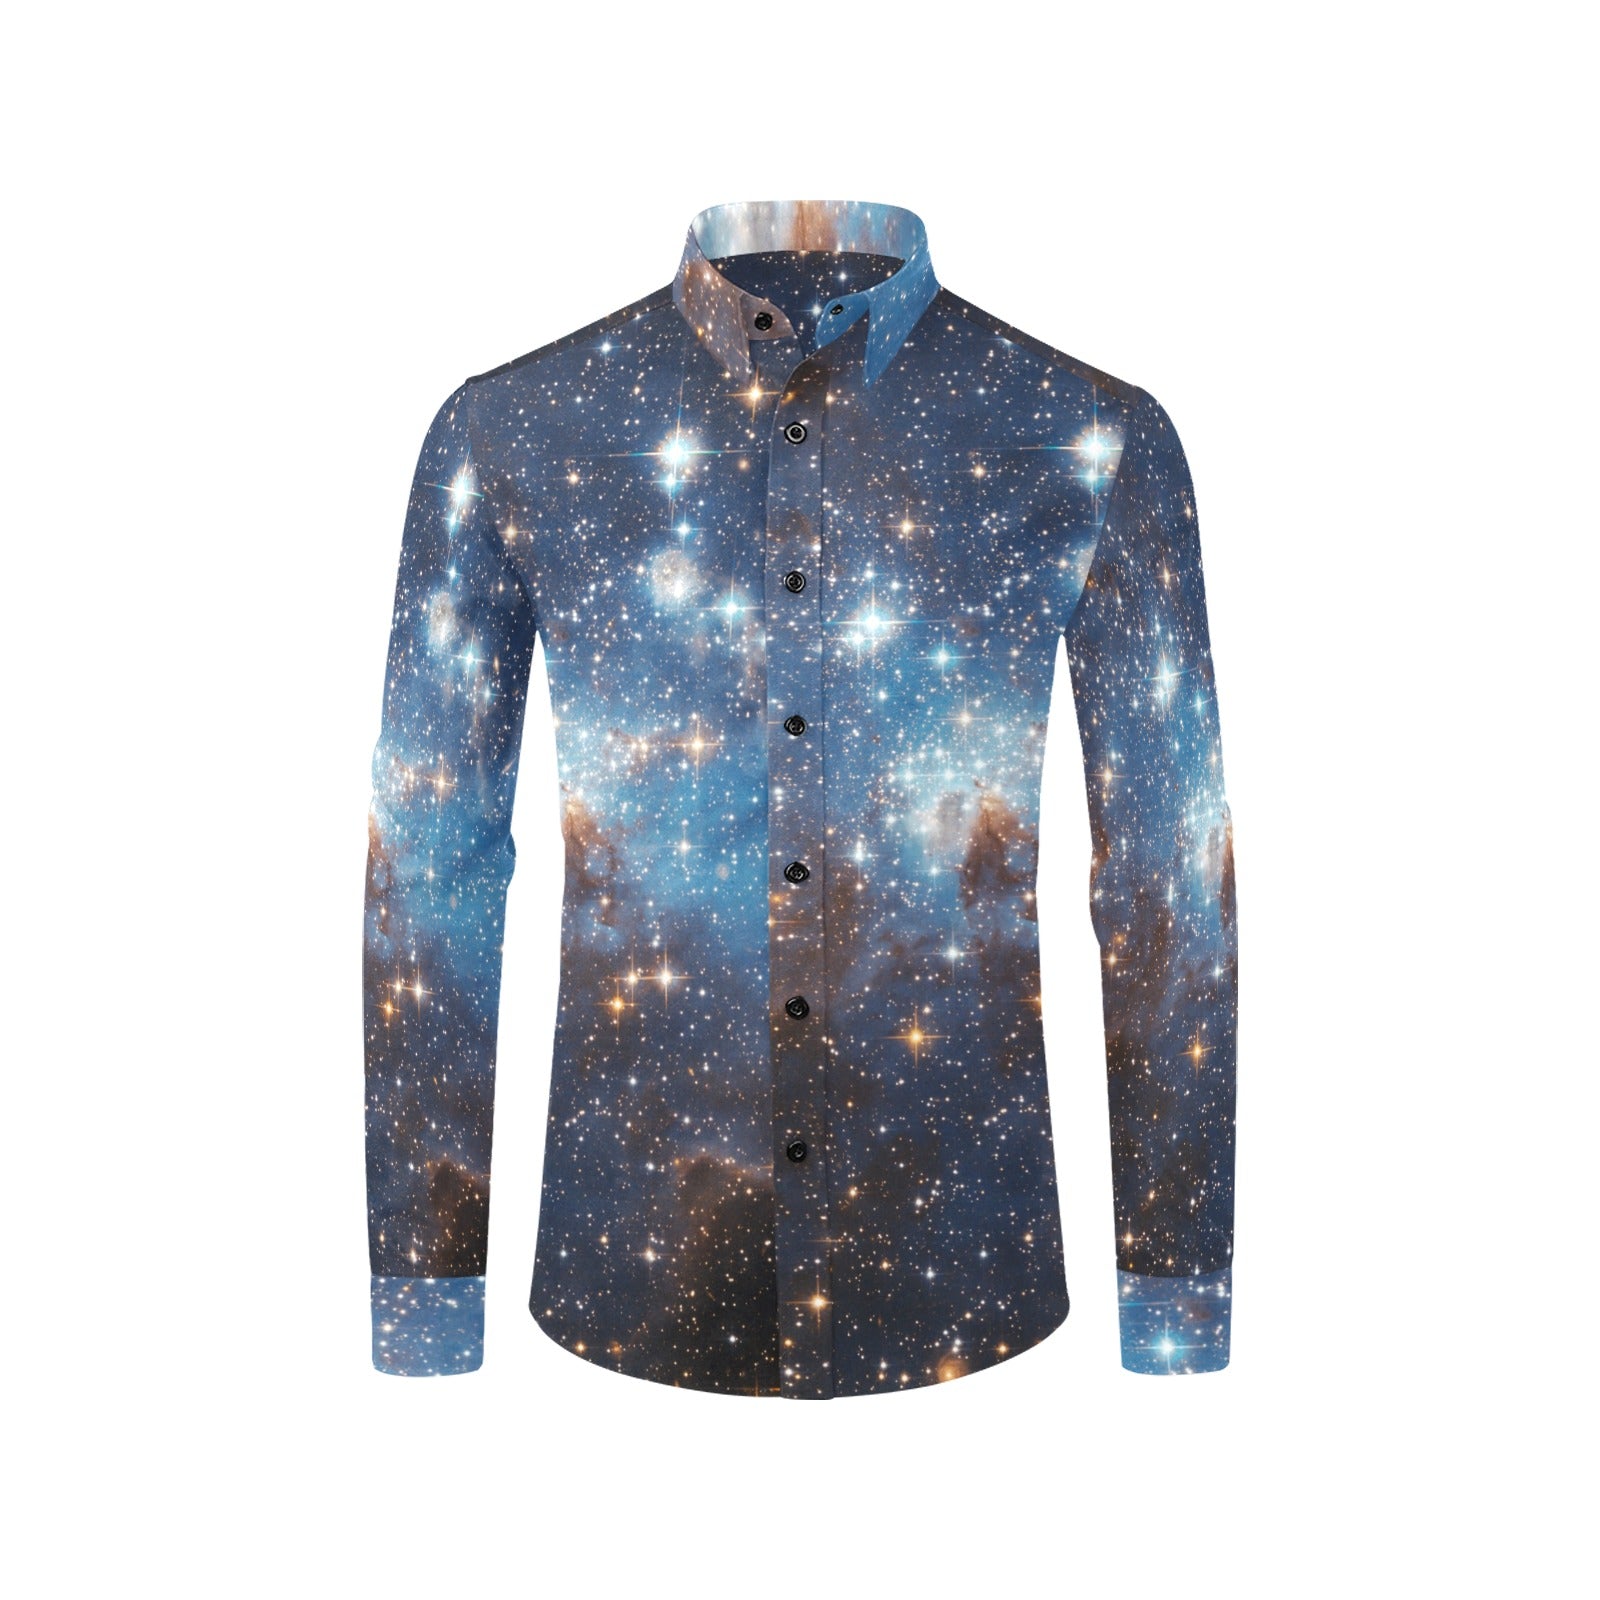 Galaxy Long Sleeve Men Button Up Shirt, Space Themed Stars Universe Cosmos Print Unique Buttoned Collar Dress Shirt with Chest Pocket Starcove Fashion